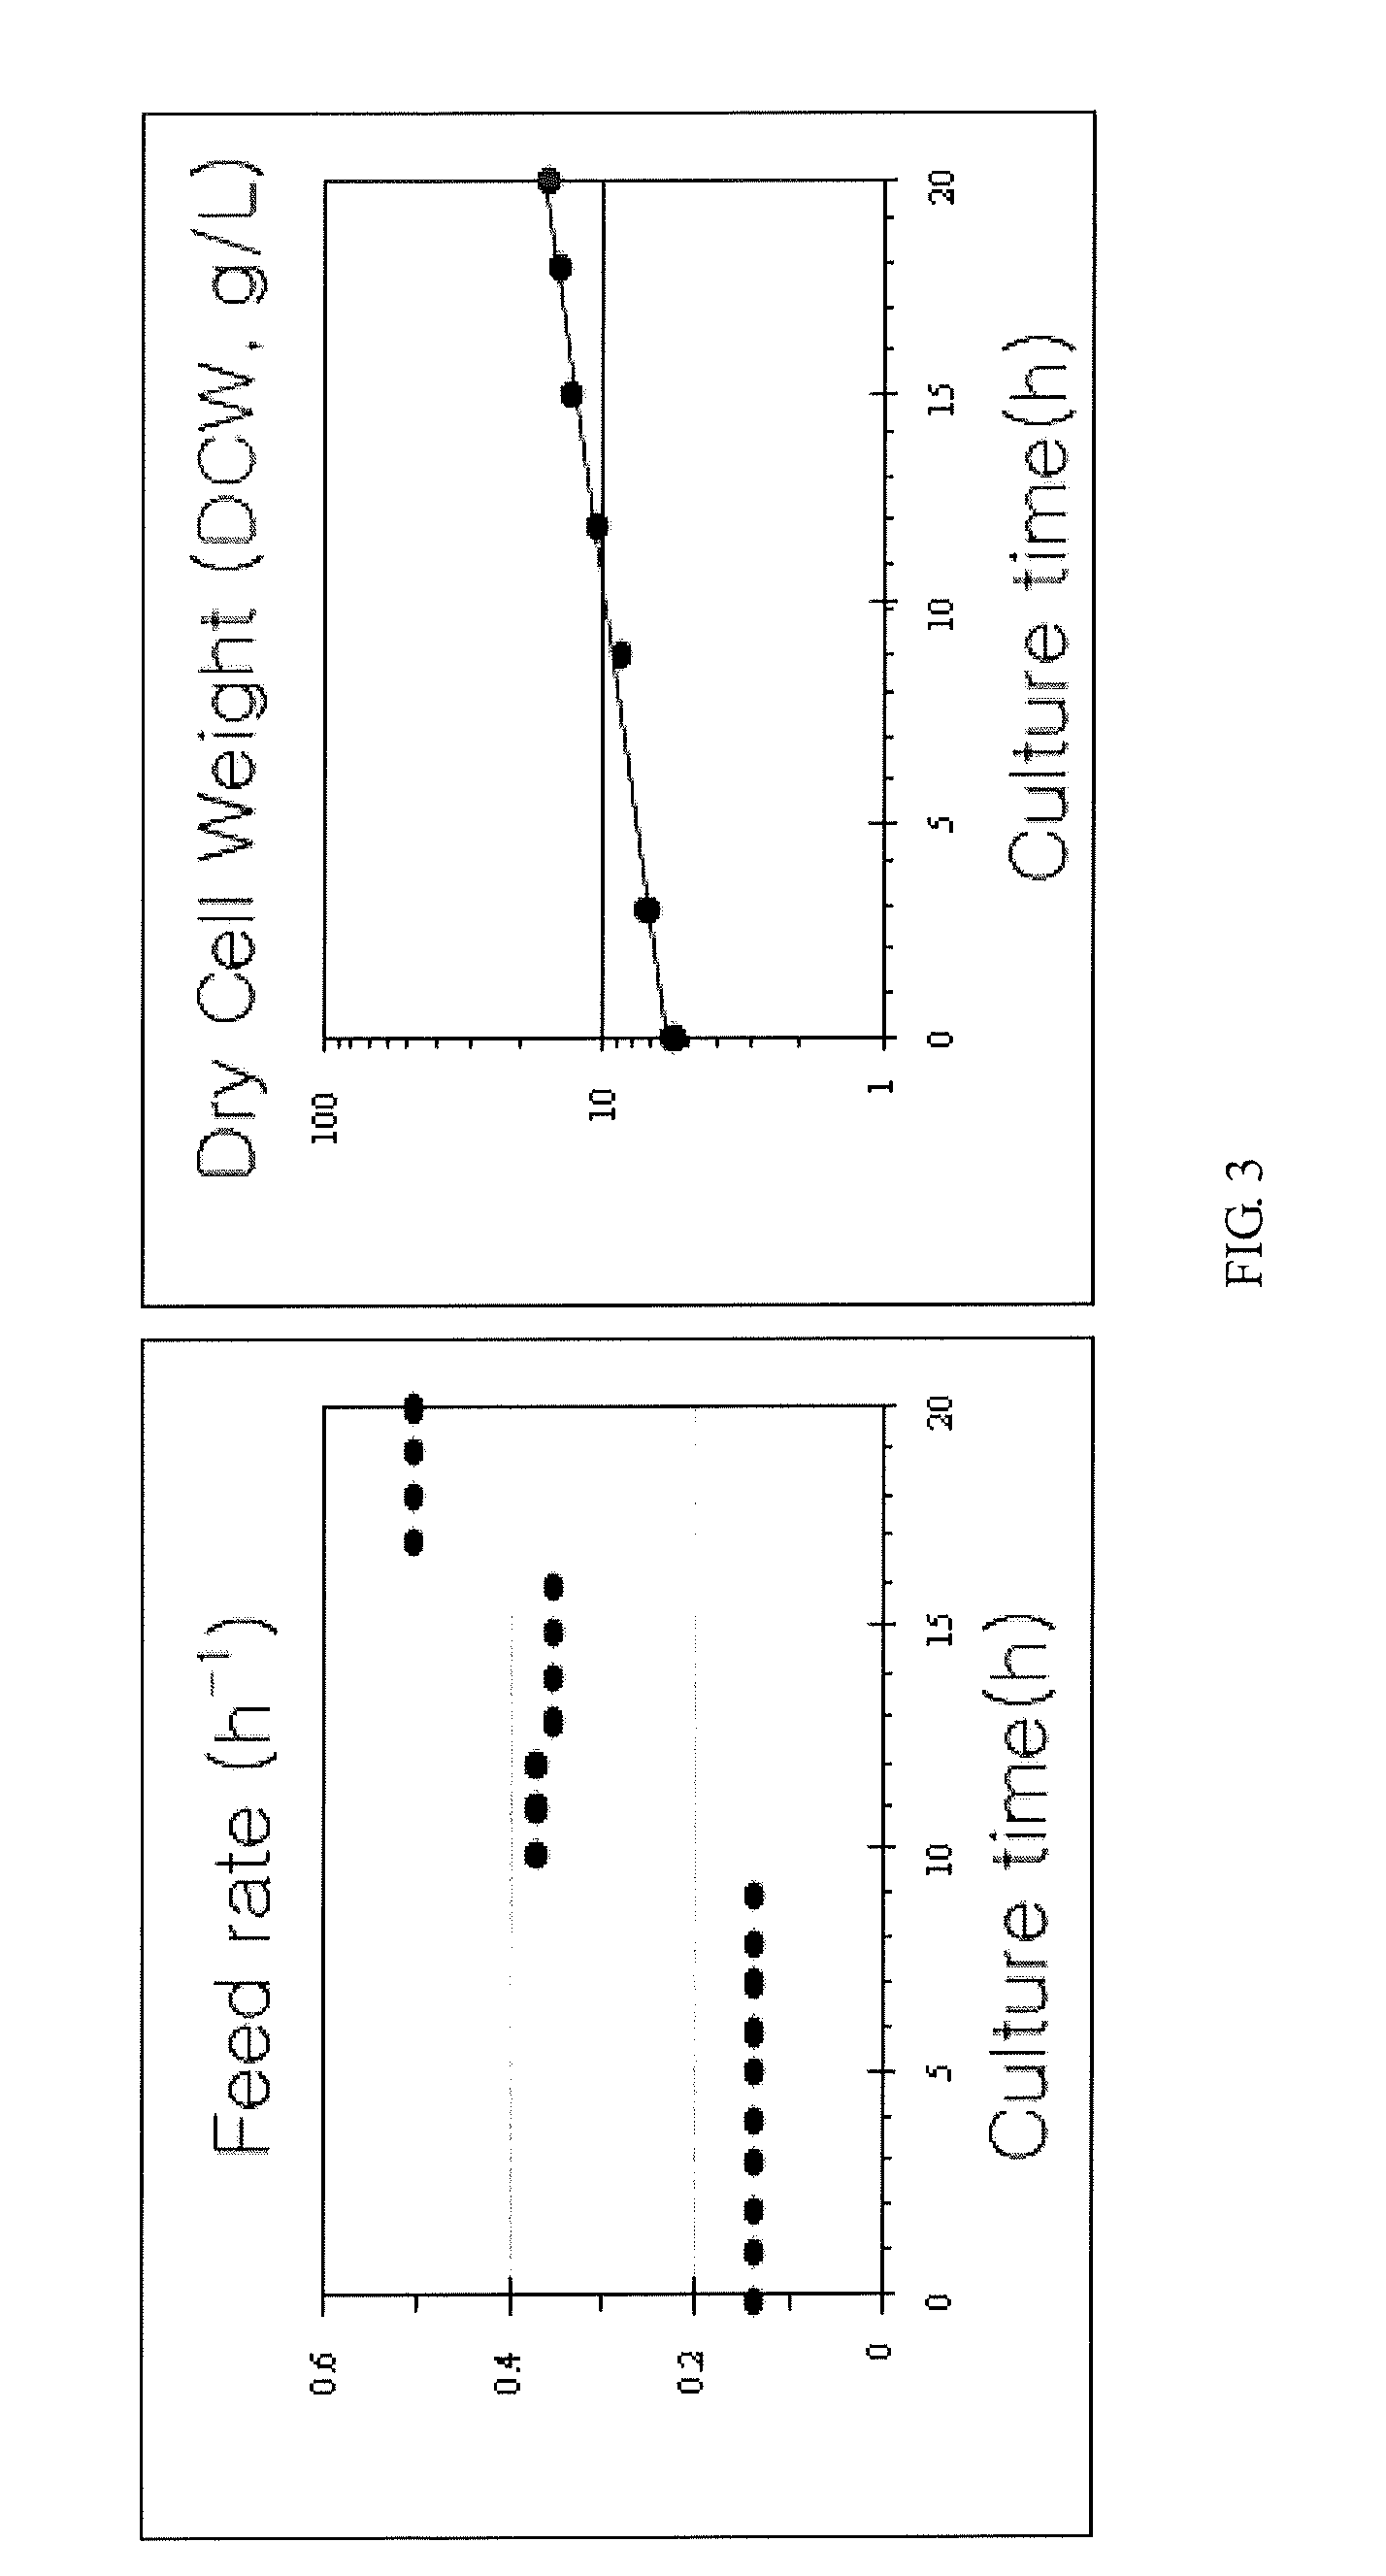 Method for producing high concentrate lactic acid bacteria with membrane bioreactor and freeze-dried, lactic acid bacteria powder